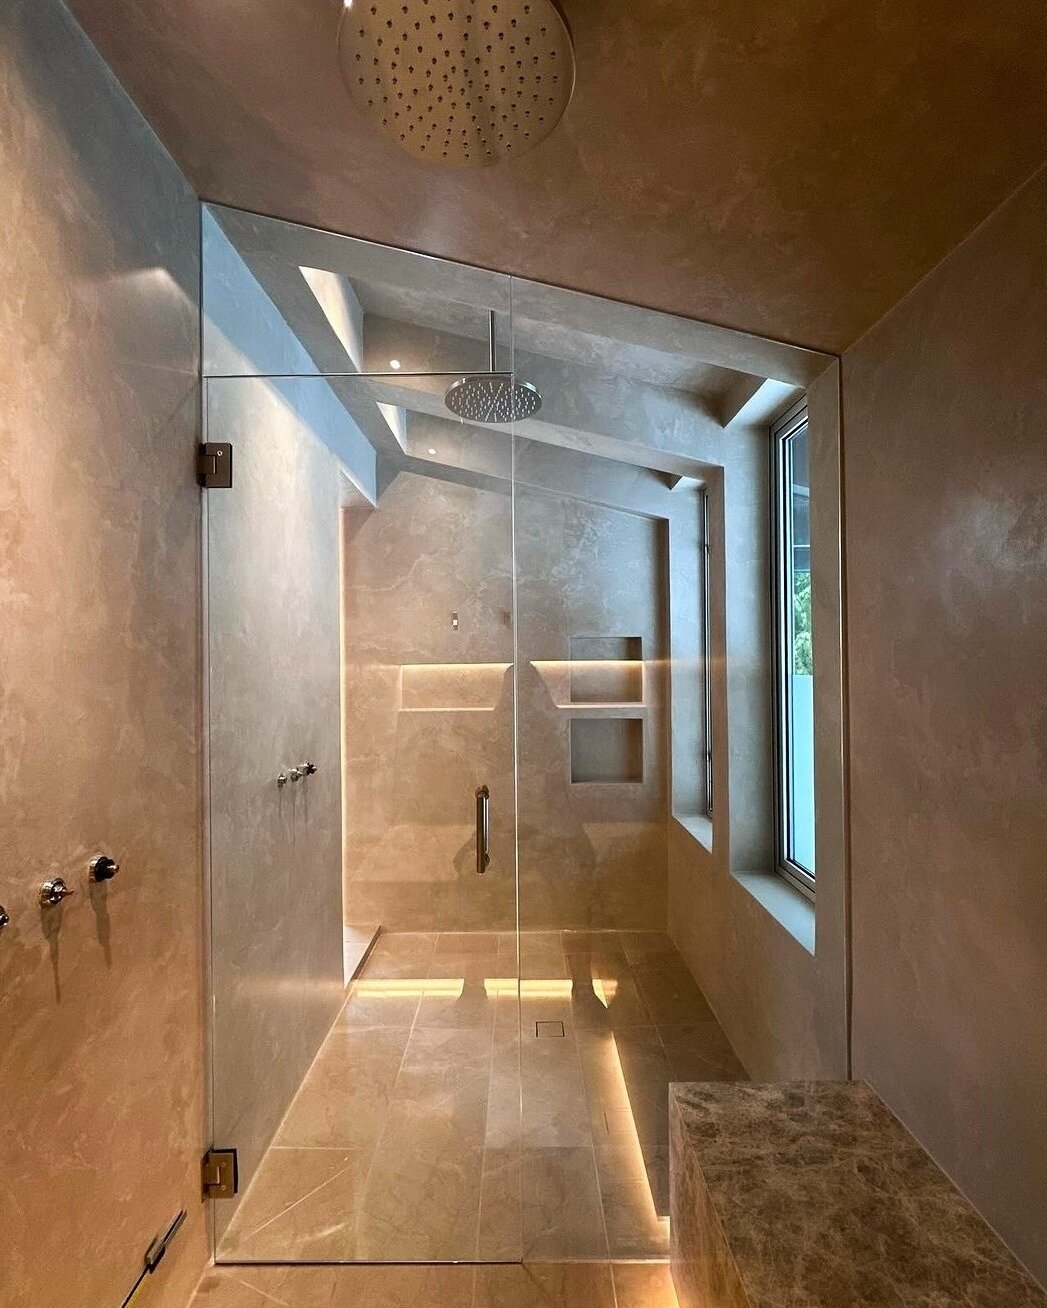 Another great example of the incredible craftsmanship required to work with plaster. It's always an honour to work with @contemporaryhouse 

The results are always outstanding and breathtaking, not to mention that this shower will withstand the test 